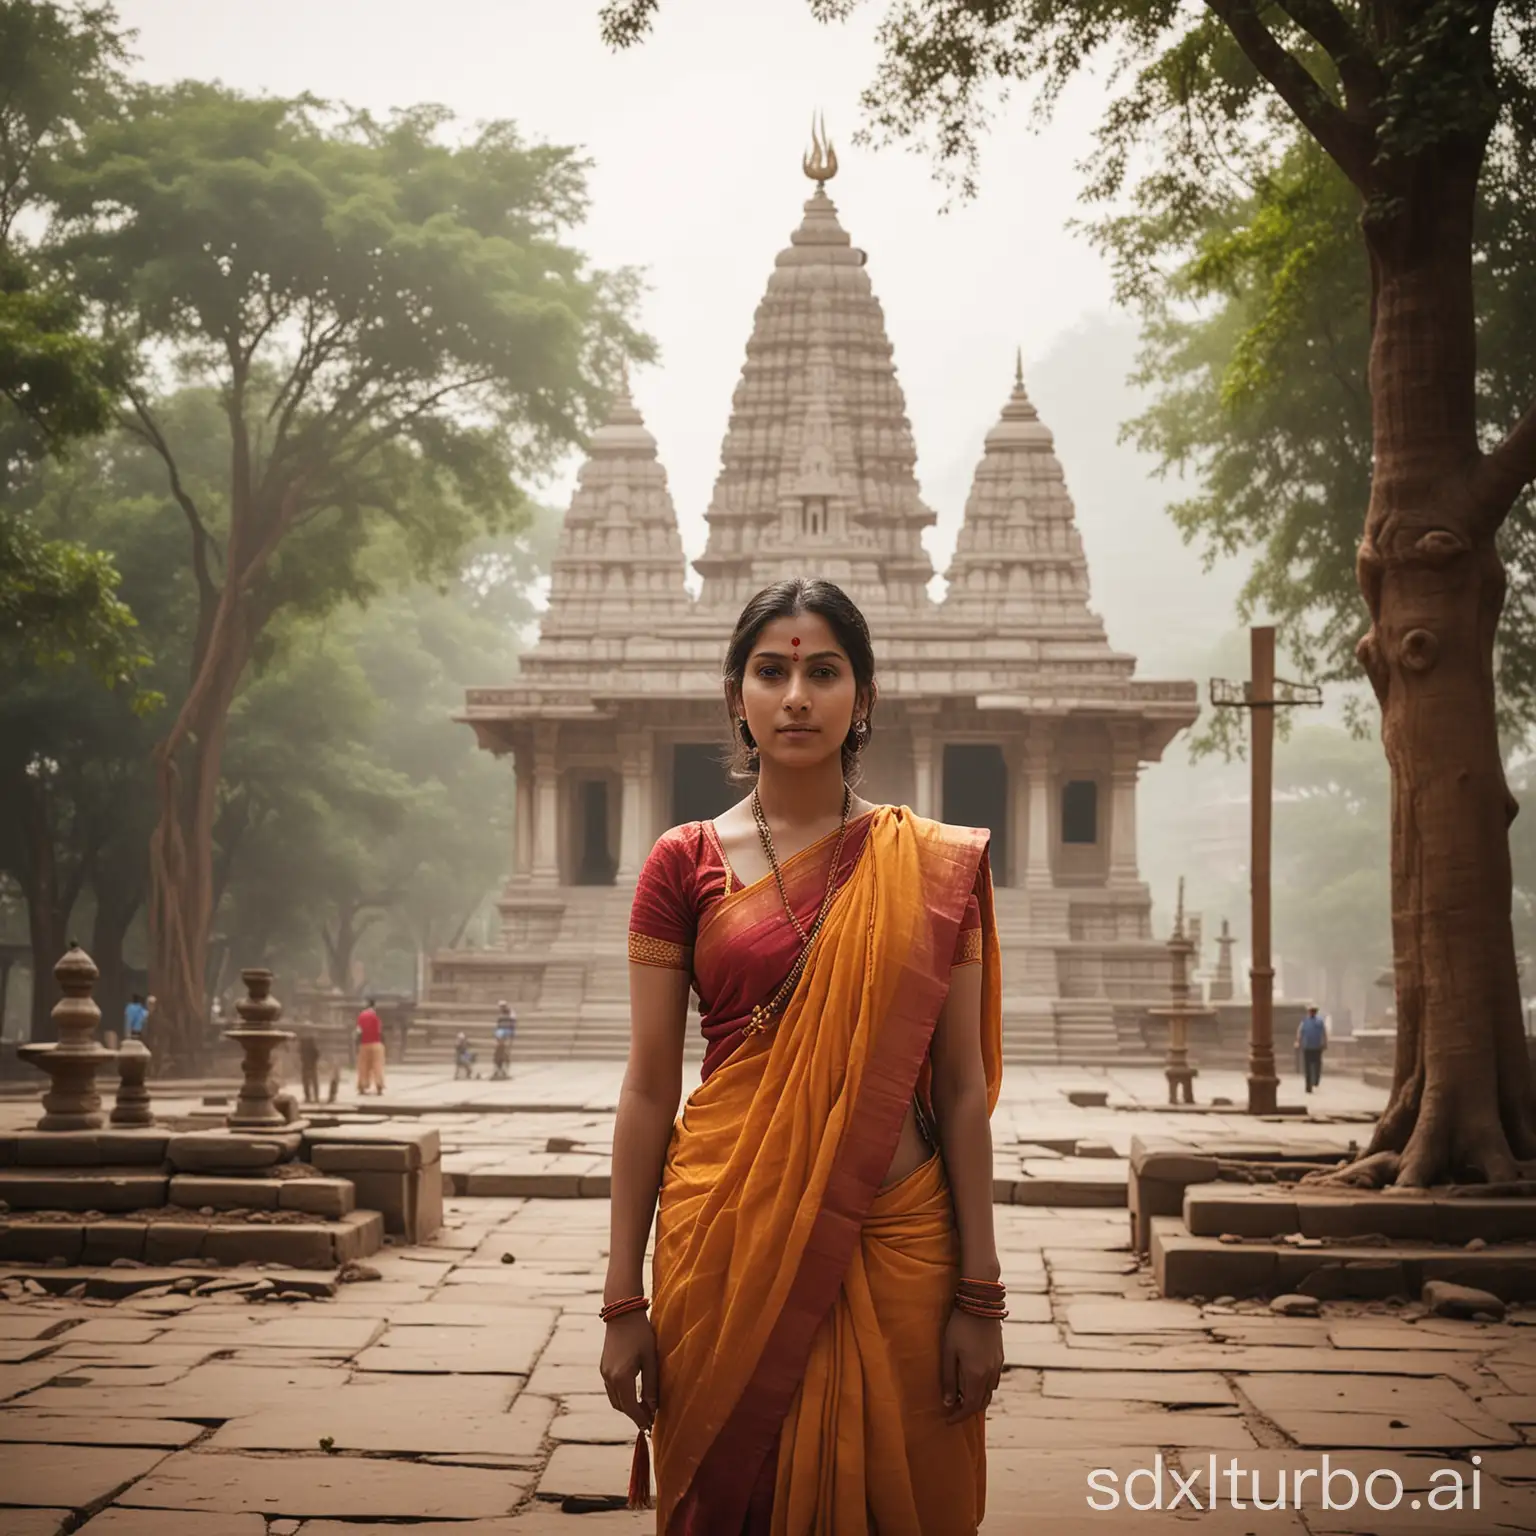 A serene and tranquil scene featuring the Sharda Maa temple in India with a soft, out-of-focus background. The image is taken from shoulder level height, with a person in the foreground looking at the temple. The background should be subtly blurred to create a depth-of-field effect, emphasizing the temple's structure and beauty. The atmosphere is peaceful and spiritual, highlighting the temple's sacred and serene environment.